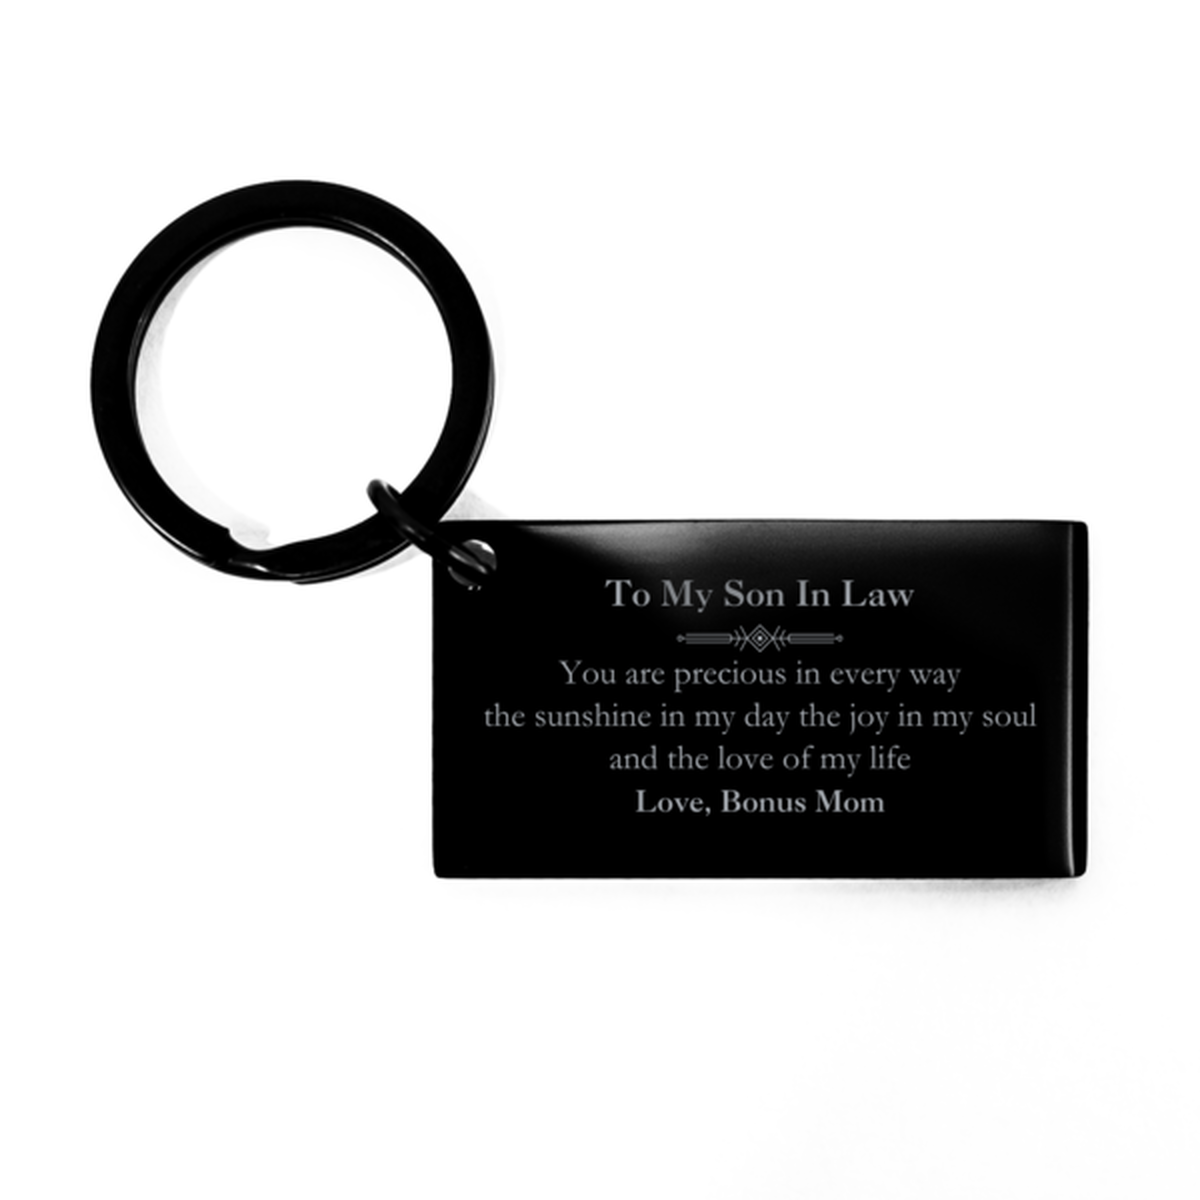 Graduation Gifts for Son In Law Keychain Present from Bonus Mom, Christmas Son In Law Birthday Gifts Son In Law You are precious in every way the sunshine in my day. Love, Bonus Mom